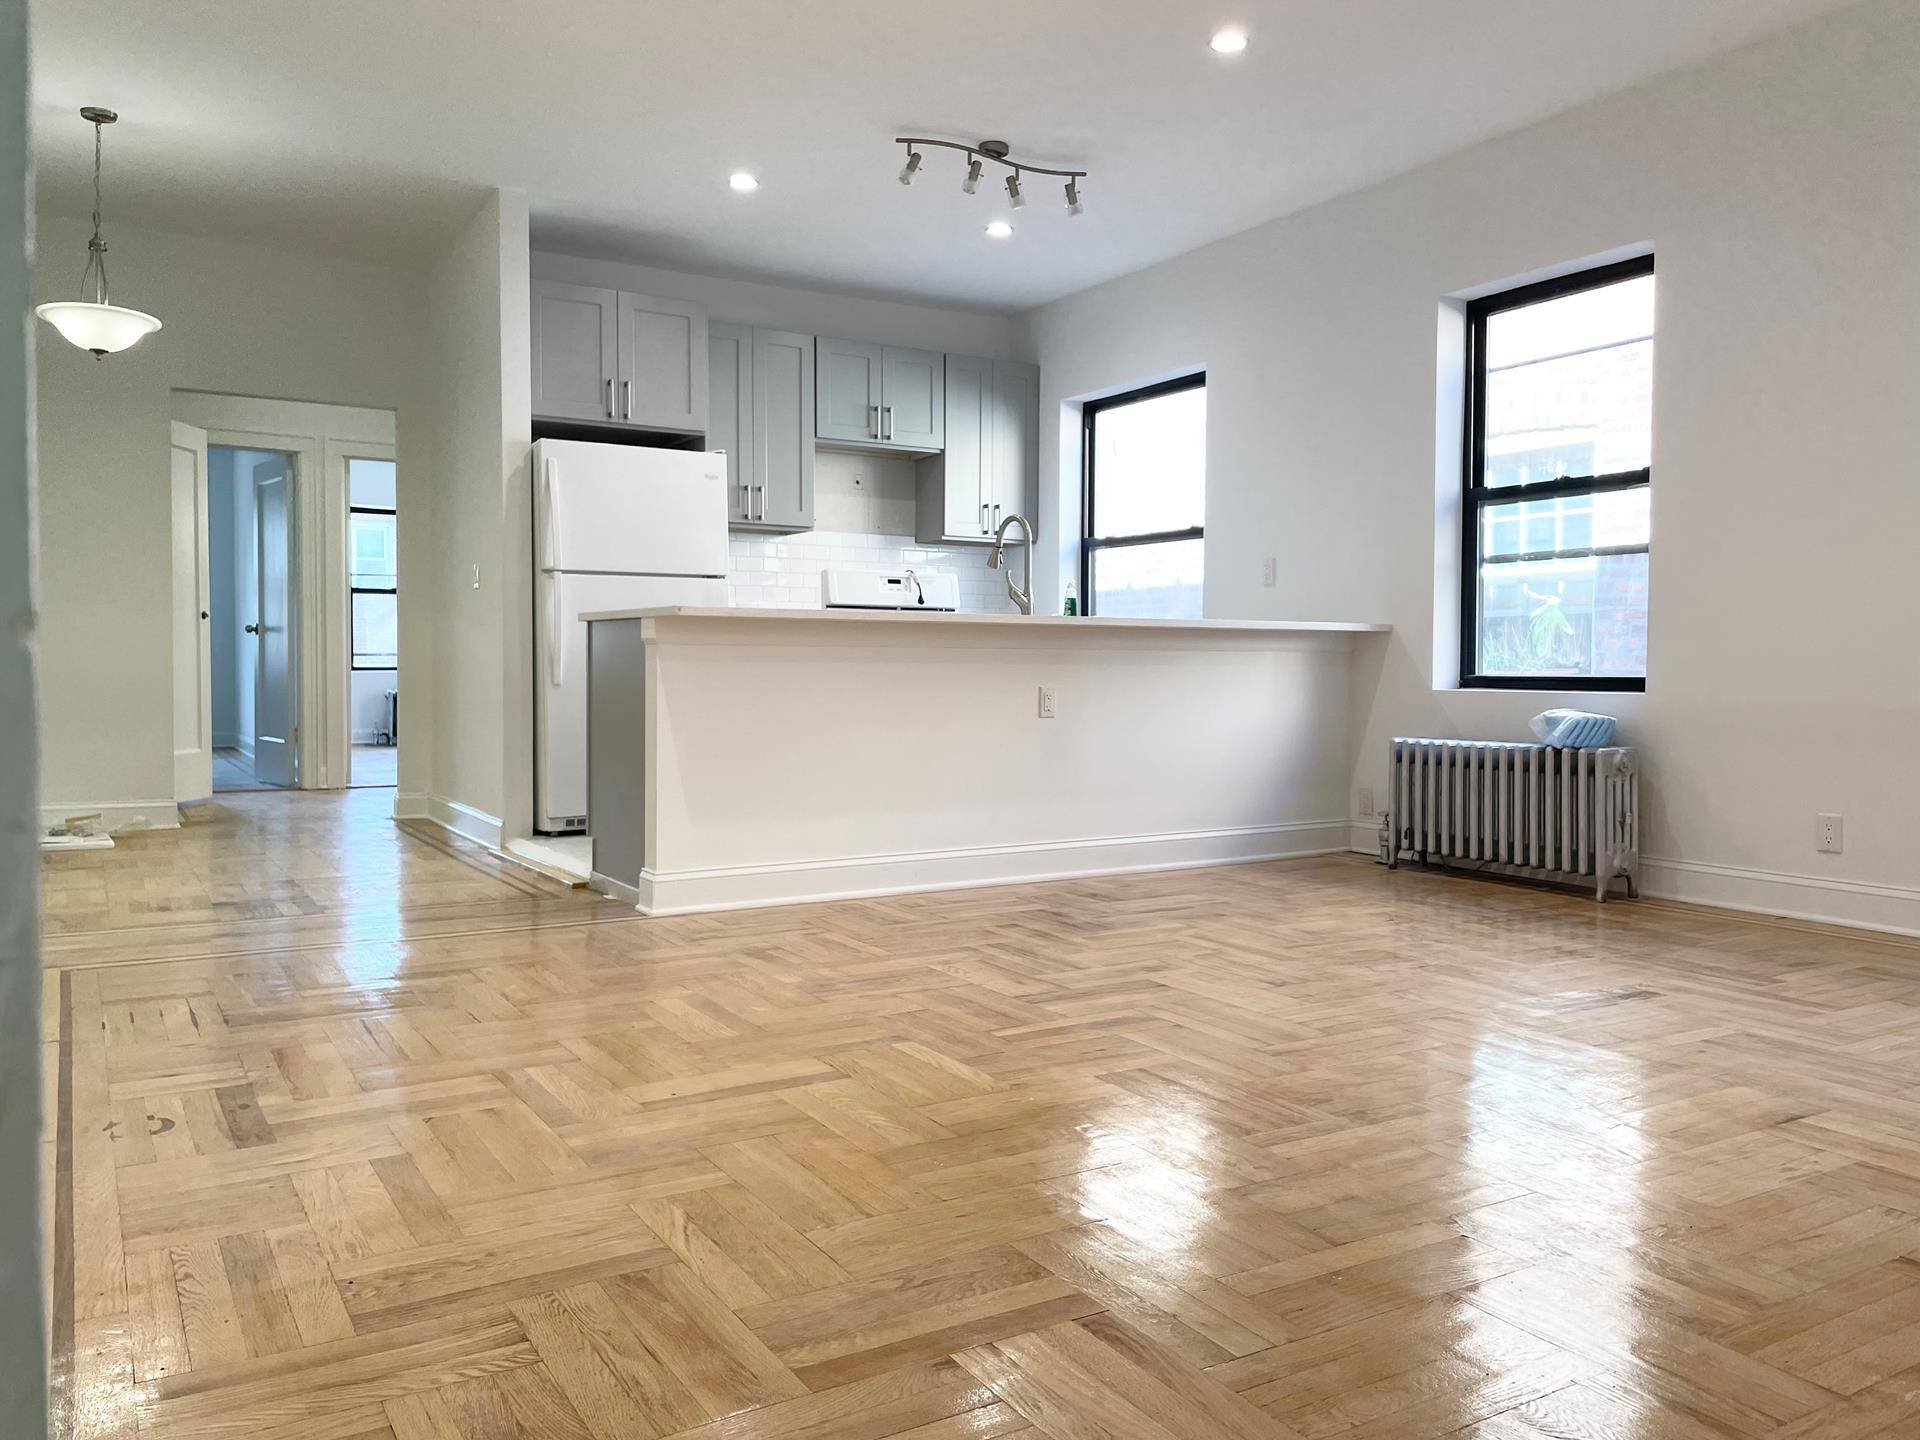 1 Car Parking included Beautiful 3 Bedrooms with big office room and 1 bathroom with 2 showers located at Woodside NY 11377 Rent 3300 included heat hot water and 1 ...